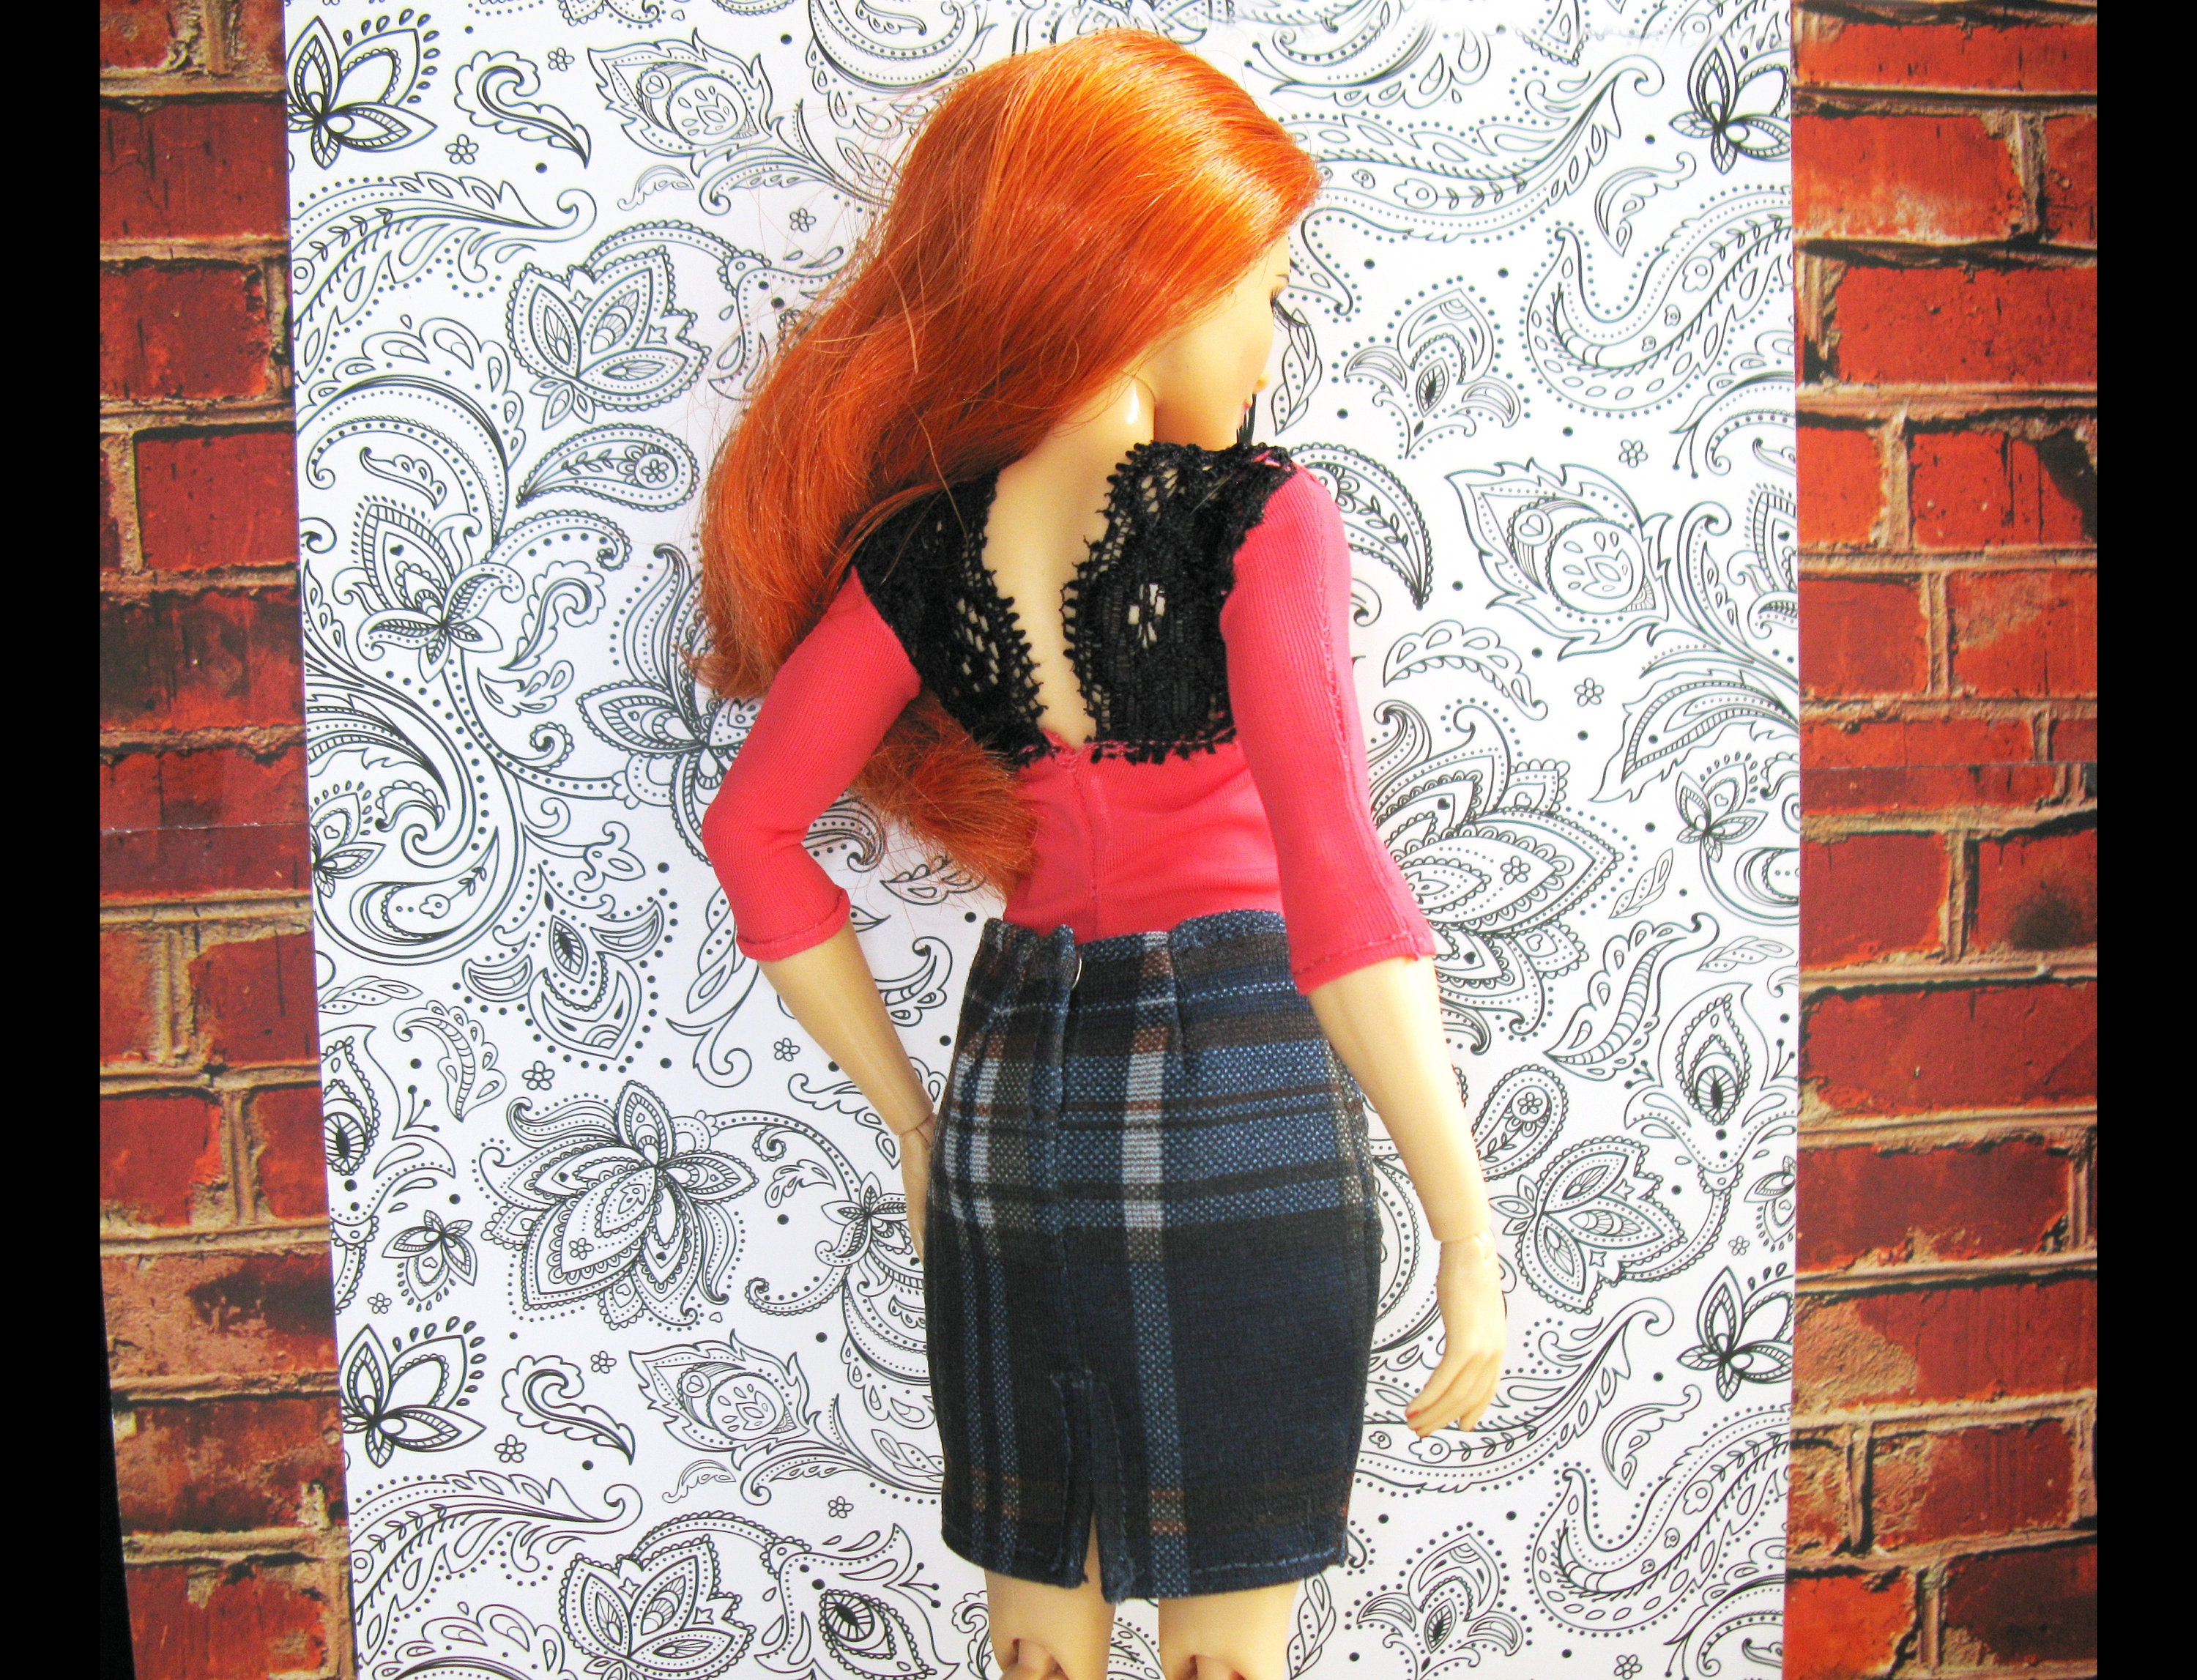 1/3 1/4 1/6 DOLL Scale Mini Plaid Skirt Clothes for 12" Female BJD Action Figure 